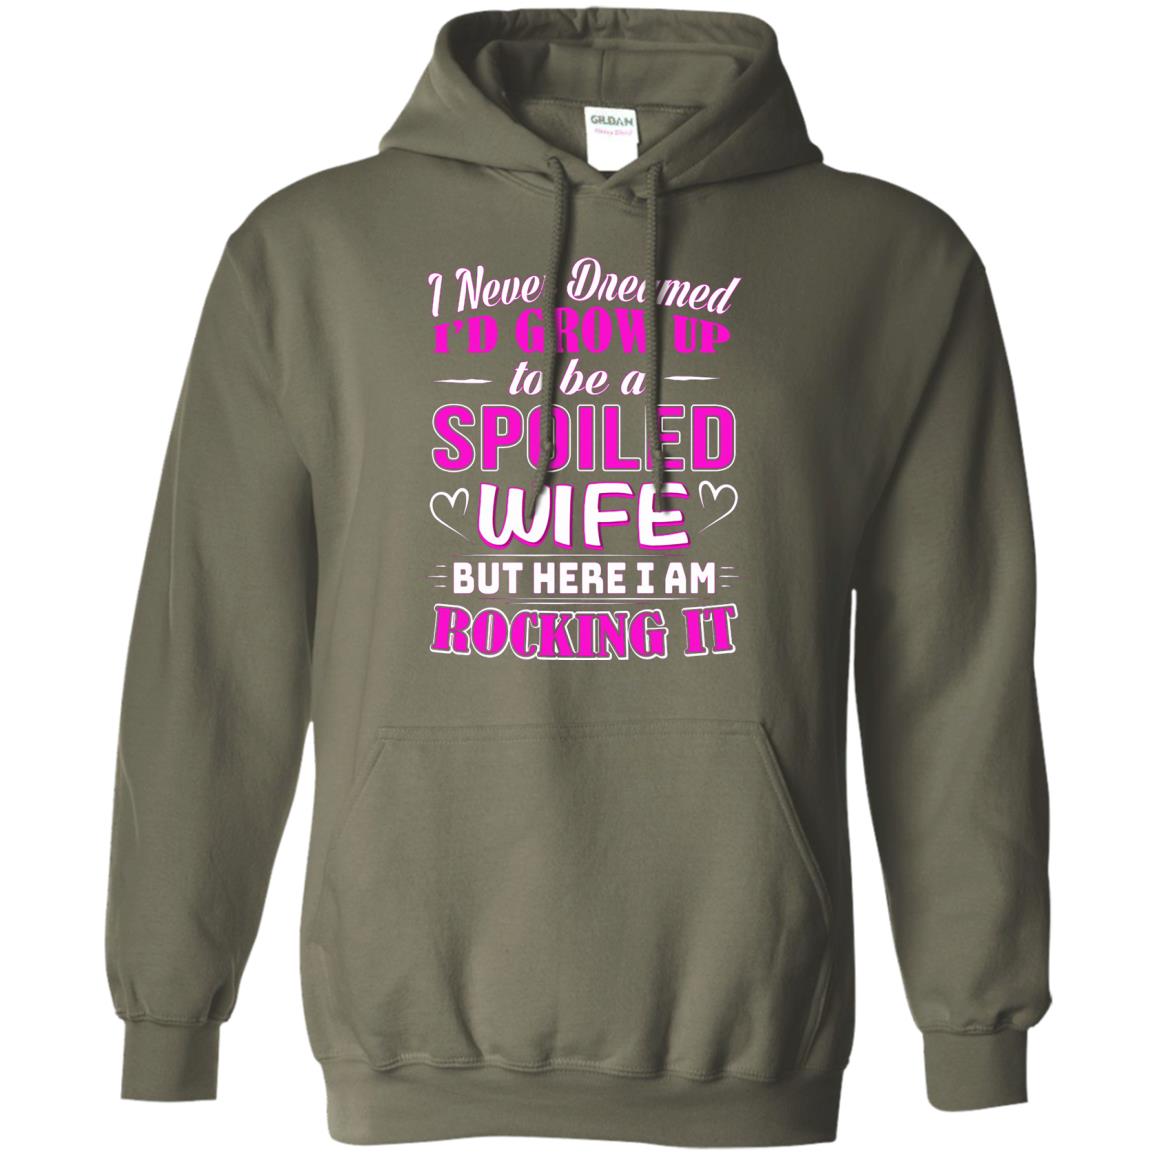 Spoiled Wife T Shirt - 10% Off - FavorMerch